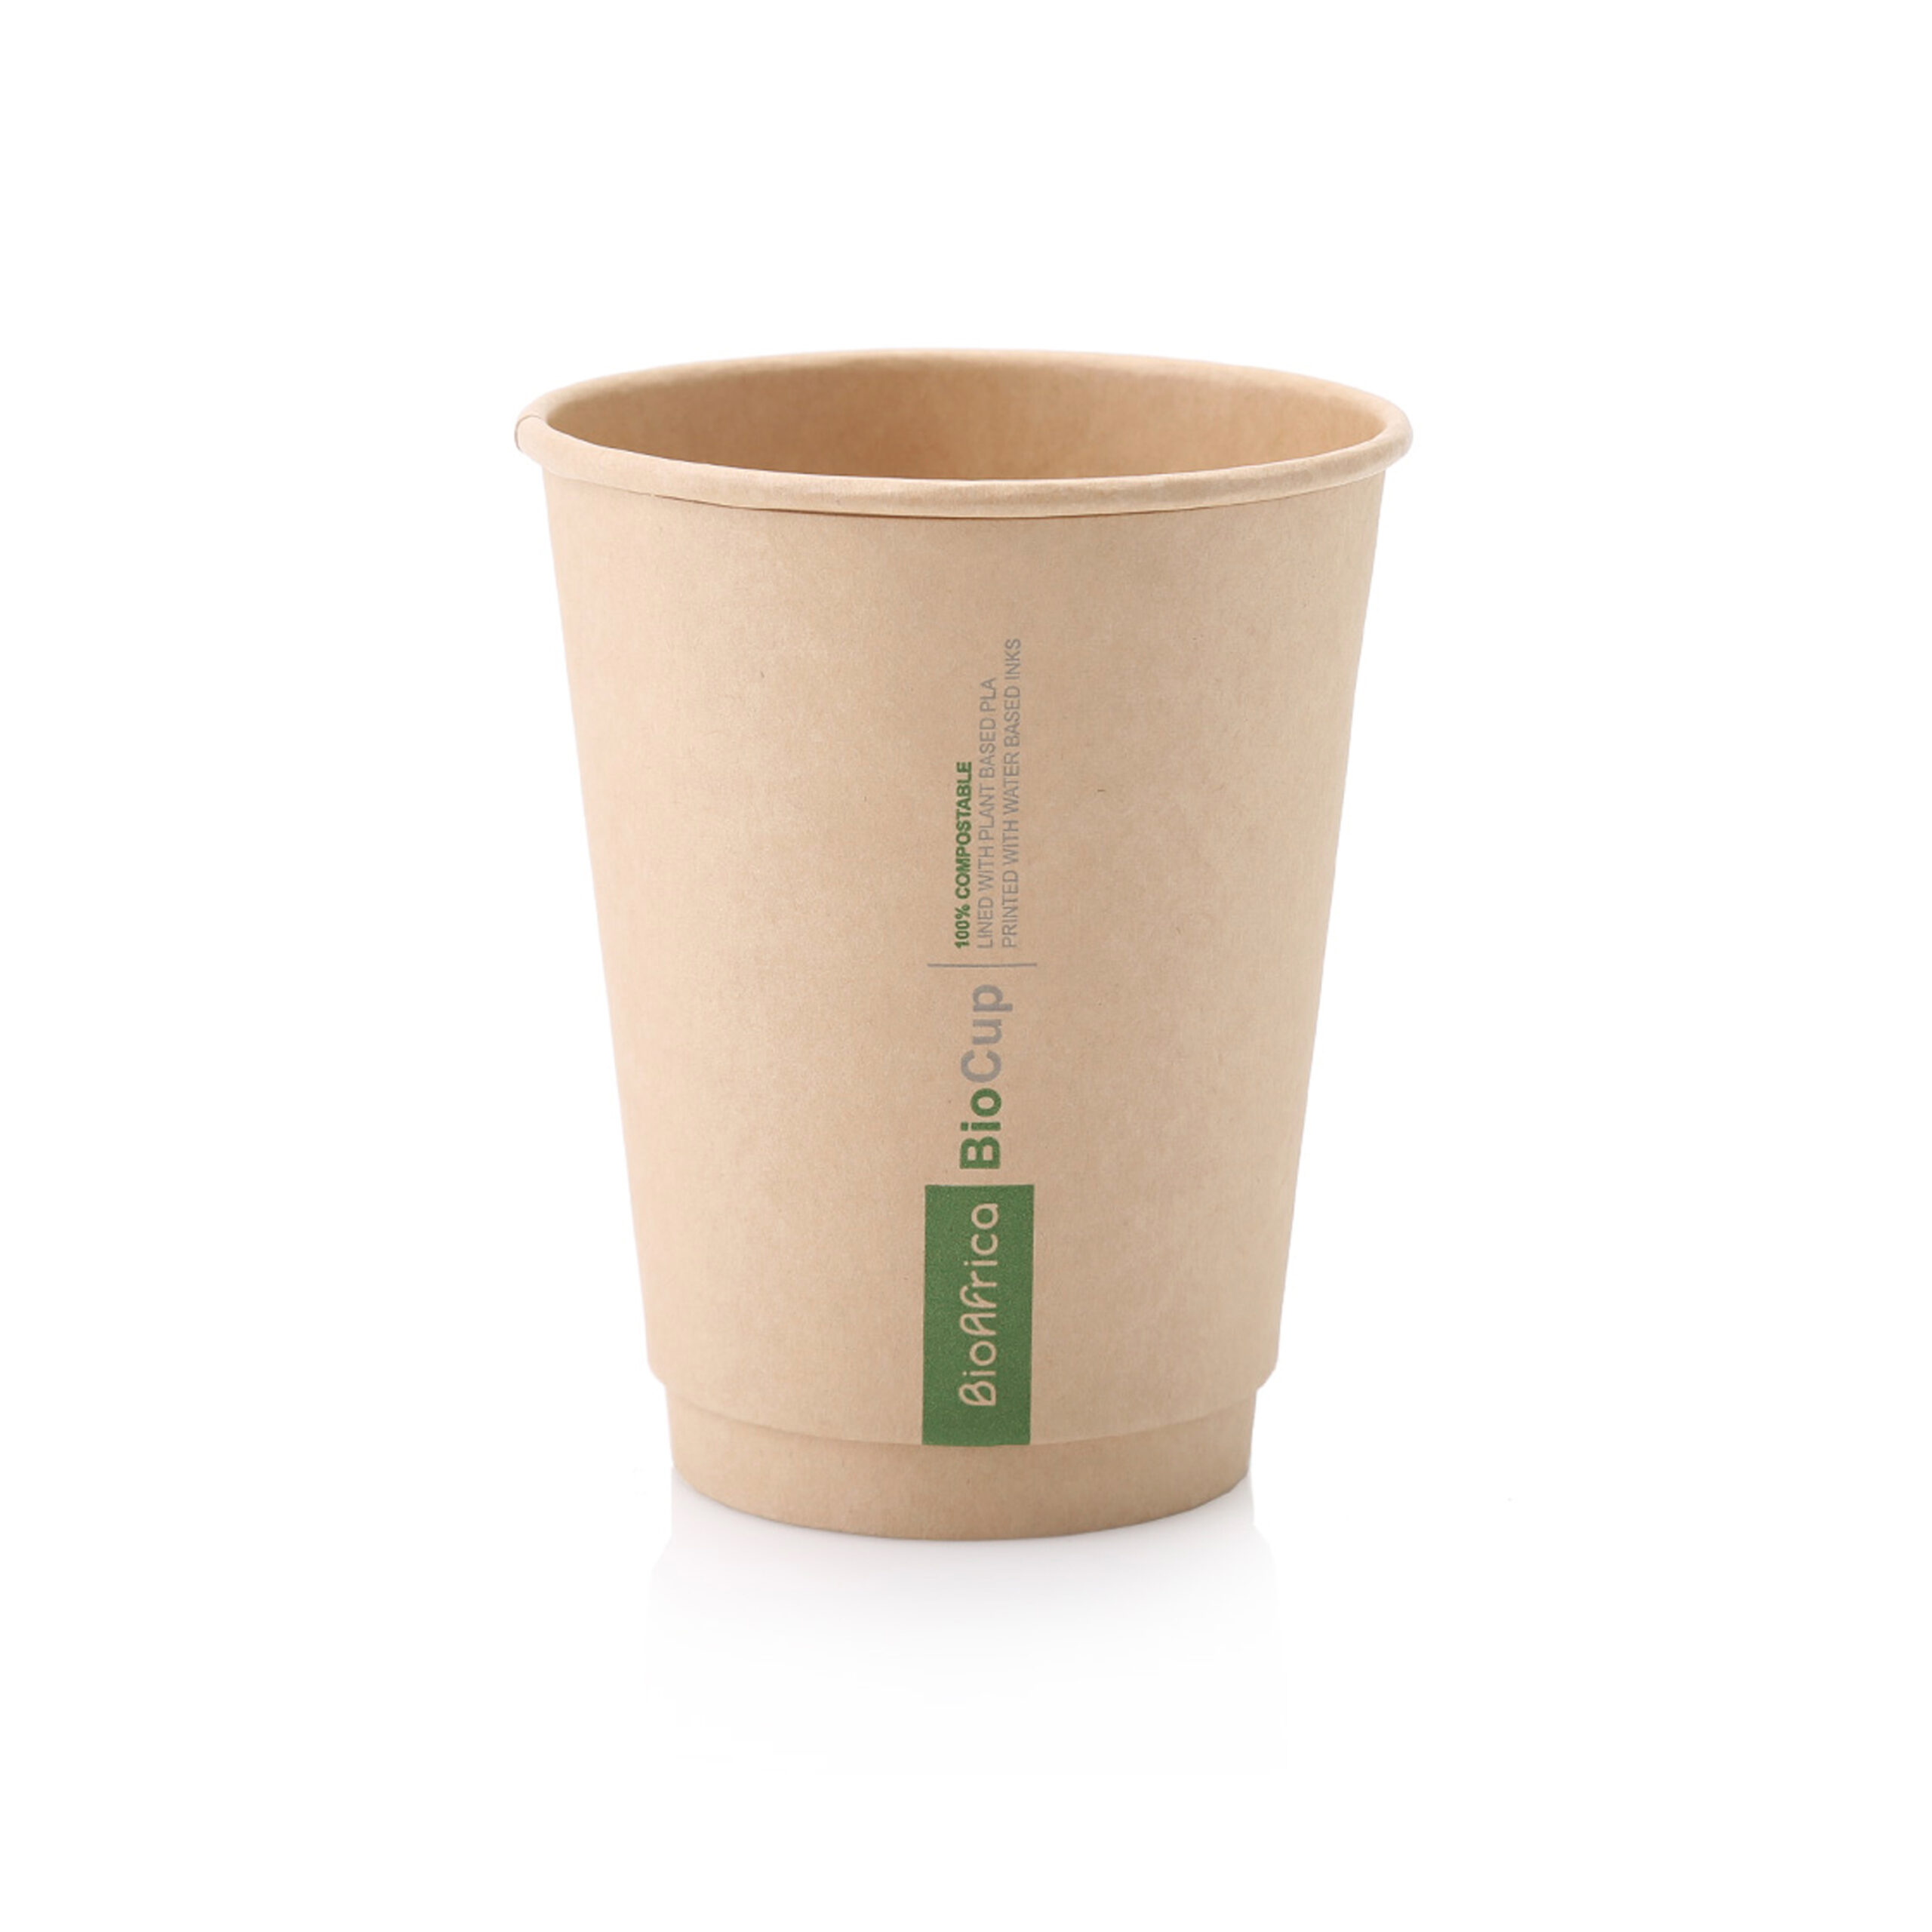 BIOAFRICA DOUBLE WALL COMPOSTABLE BIOCUP 250ml KRAFT (1x25)